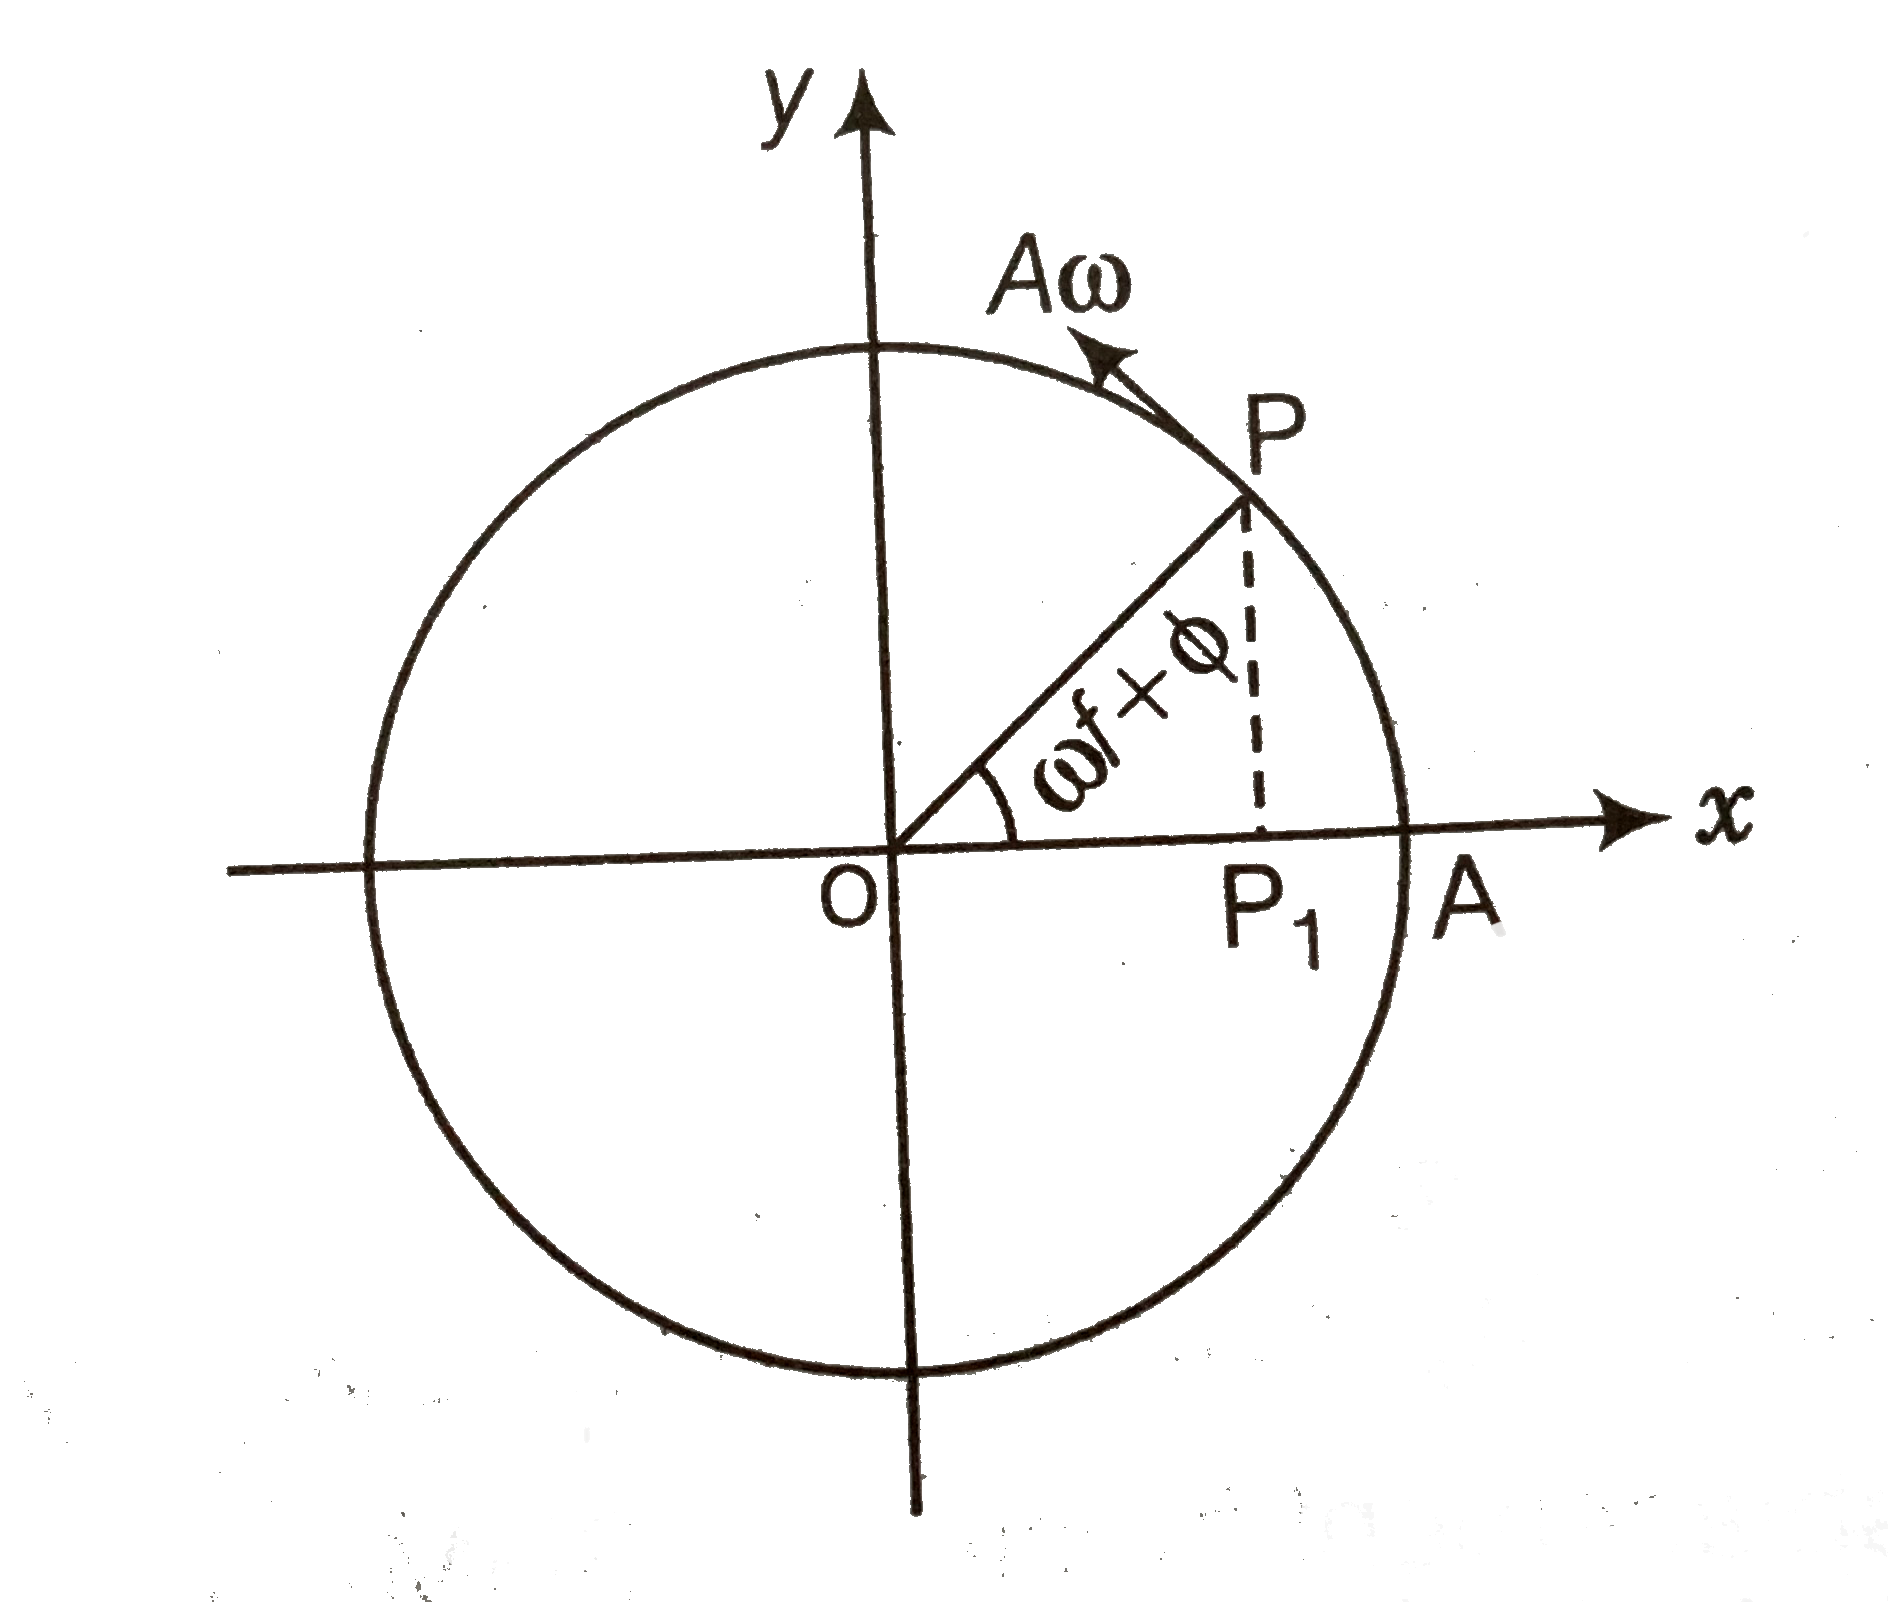 In figure, what be the sign of the velocity of the point P', which is the projection of the velocity of the reference particle P.P is moving in a circle of radius R in anti-clockwise direction.